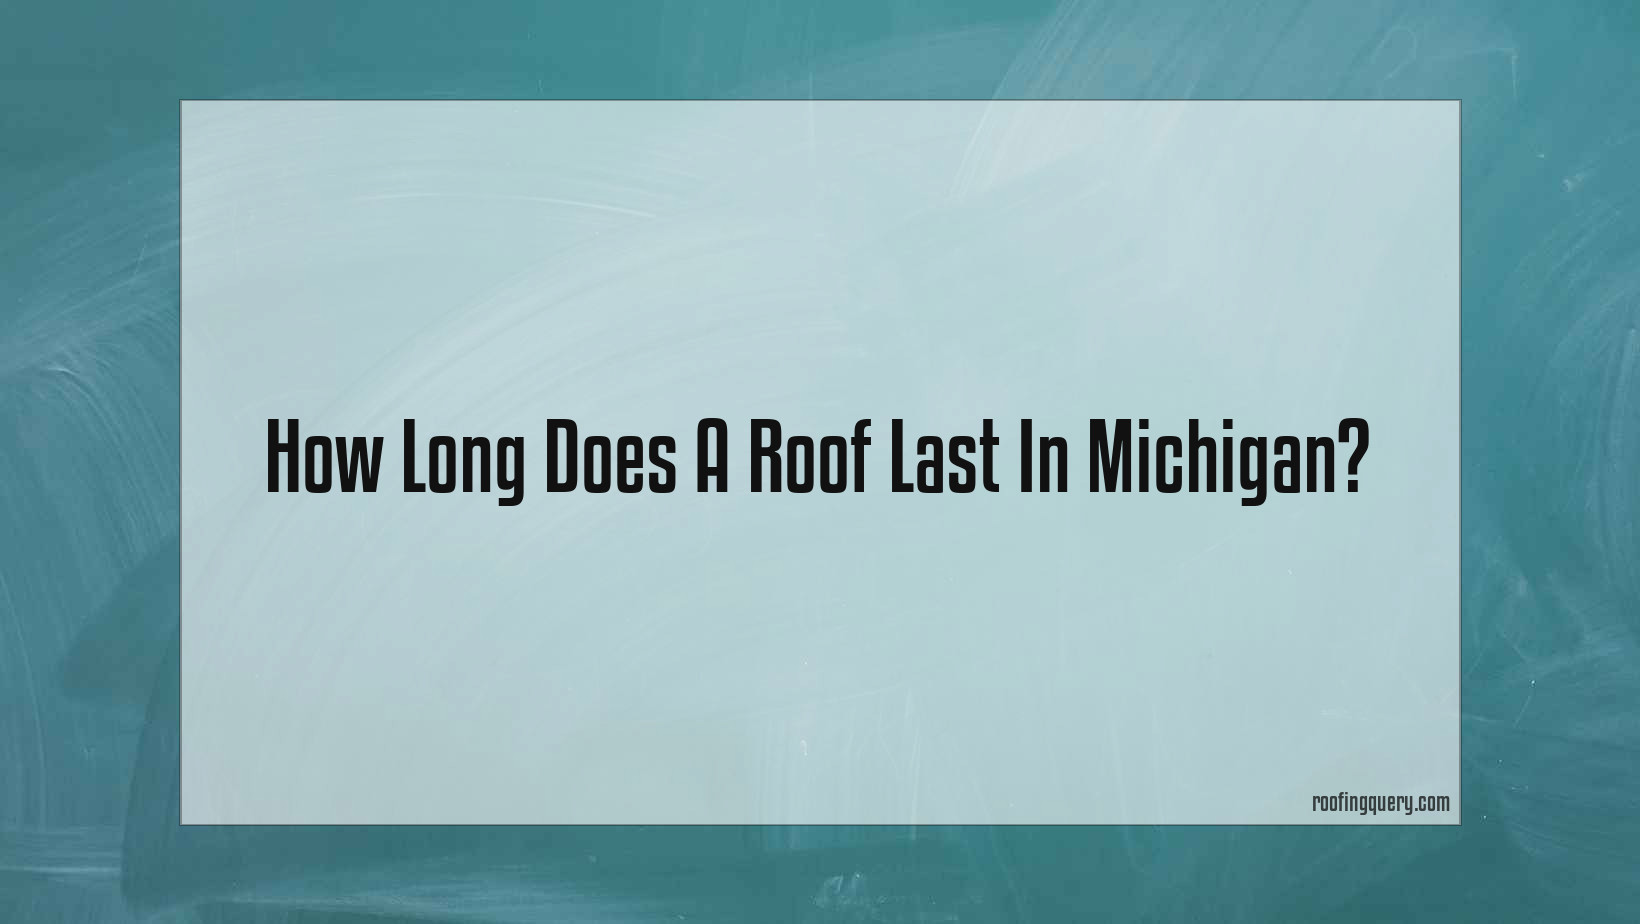 How Long Does A Roof Last In Michigan?